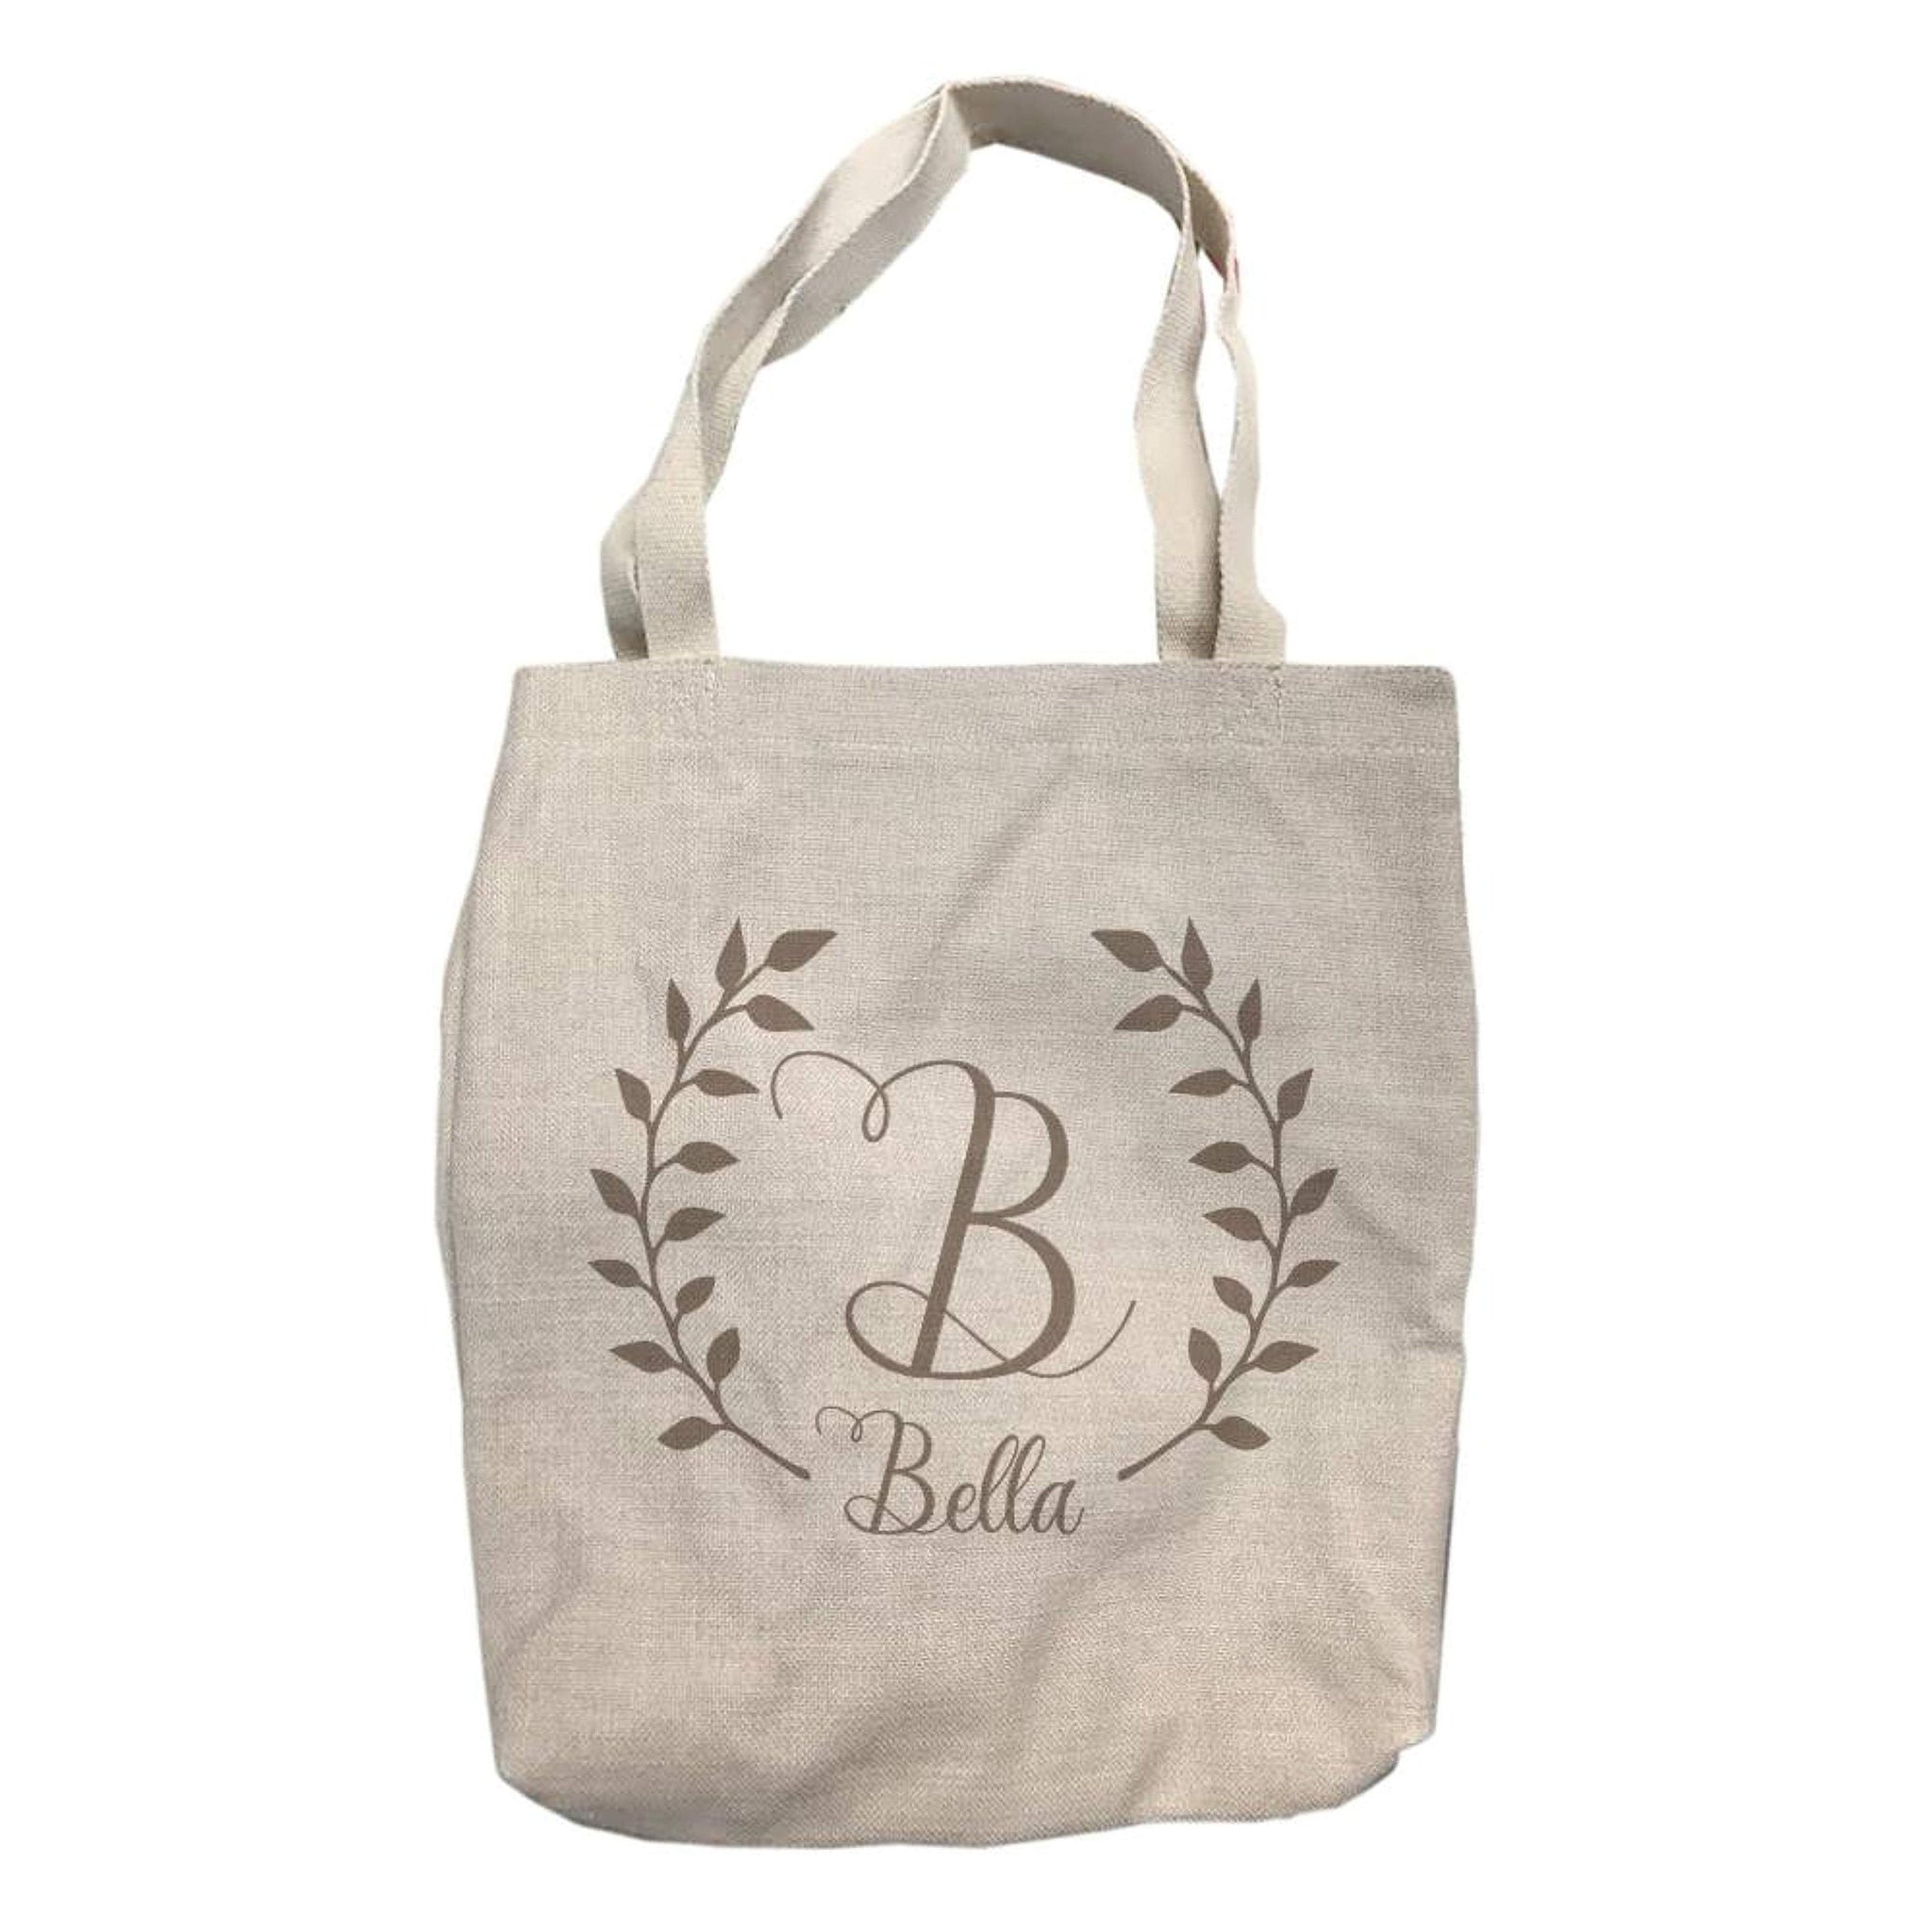 Personalized Laurel Wreath Tote Bag with Name